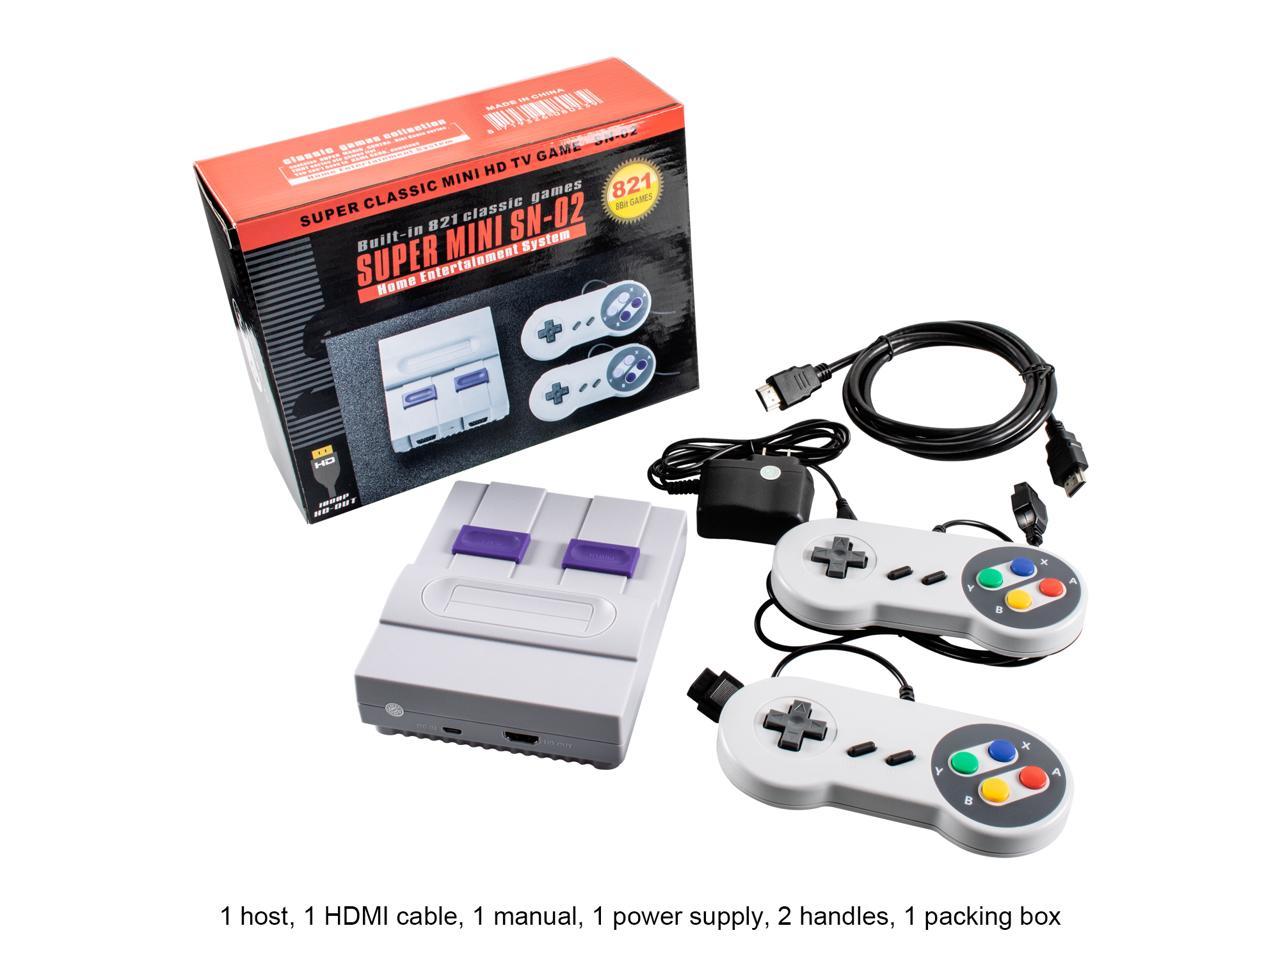 HDMI HD Output Classic Mini Retro Game Console Built-in 821 SNES Classic Games with 2 Classic Controllers Birthday Gift Happy Childhood Memories Children Gift 